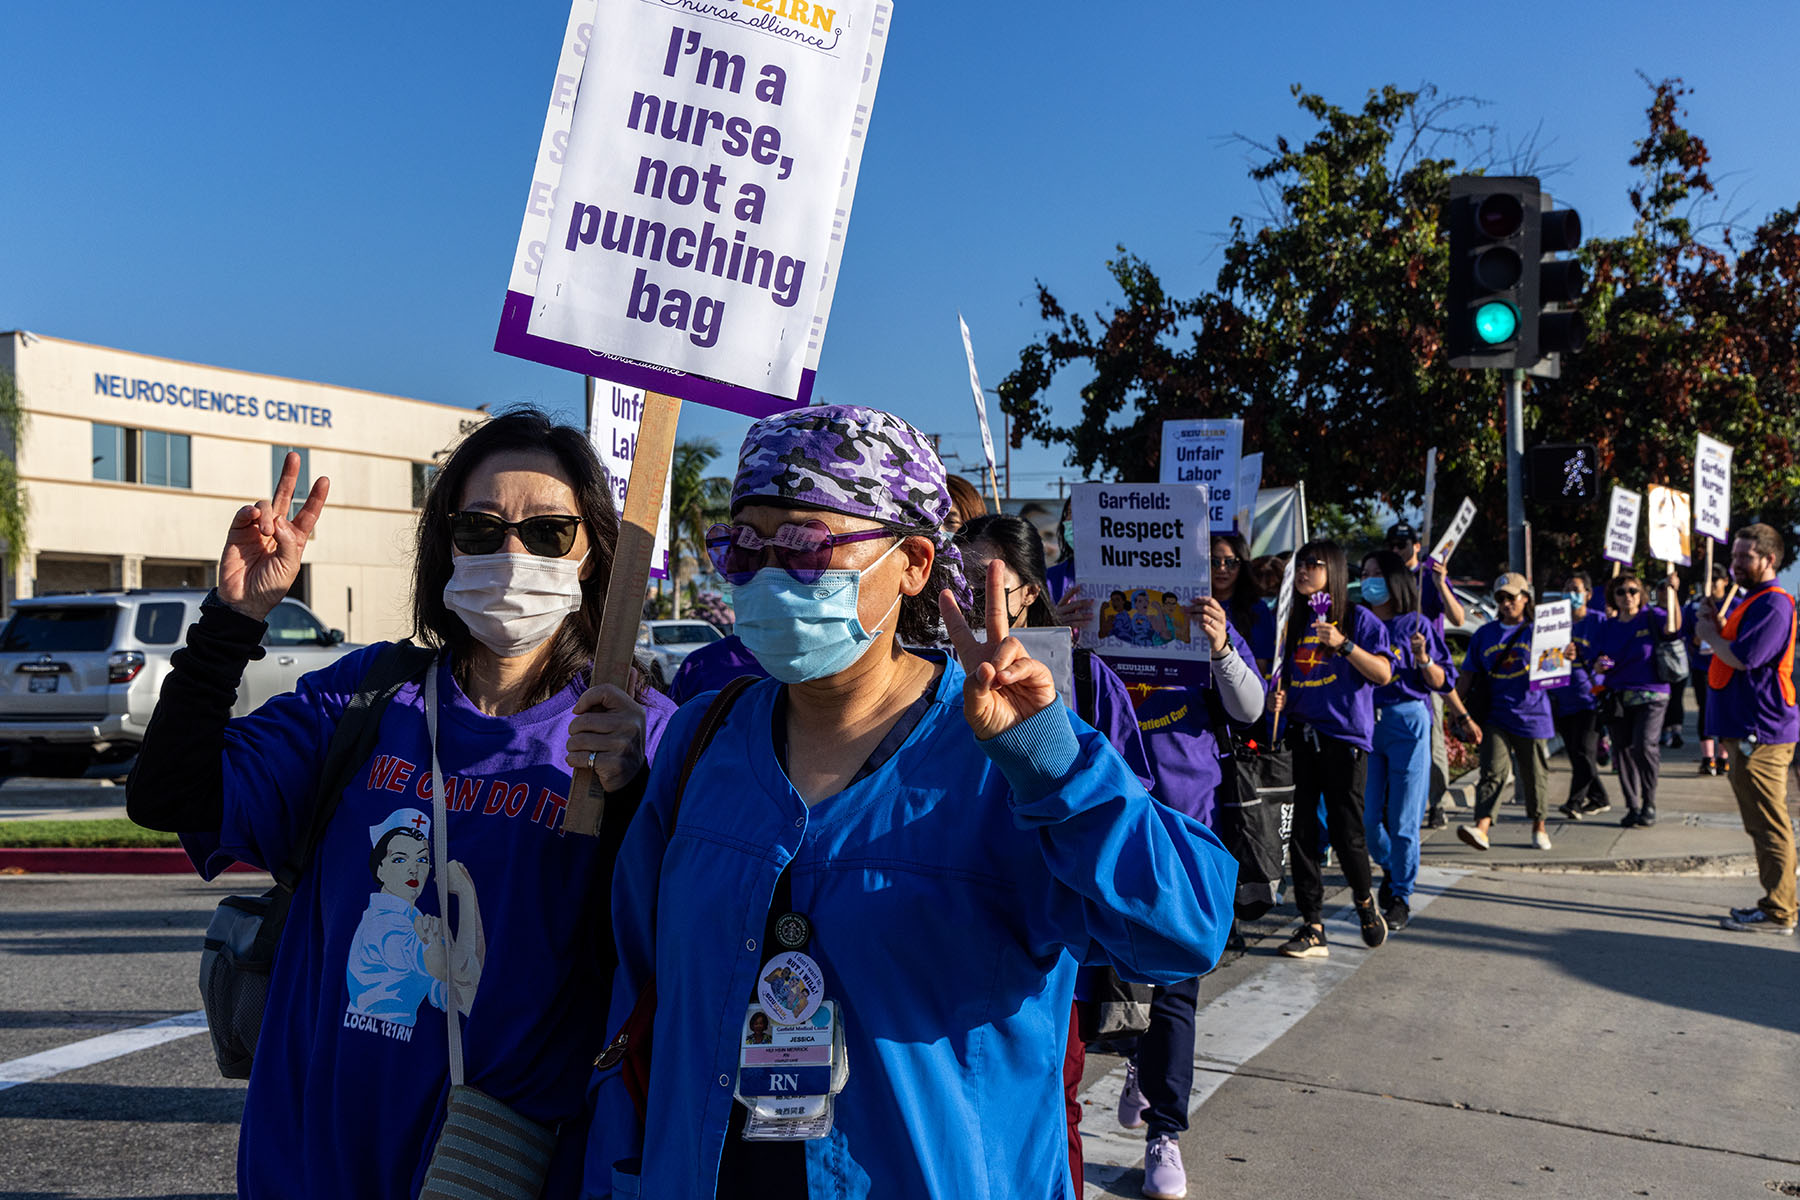 Photograph of two nurses standing in a line of protesters, both wearing masks and sunglasses. One nurse holds up a sign that says, “I’m a nurse, not a punching bag.”